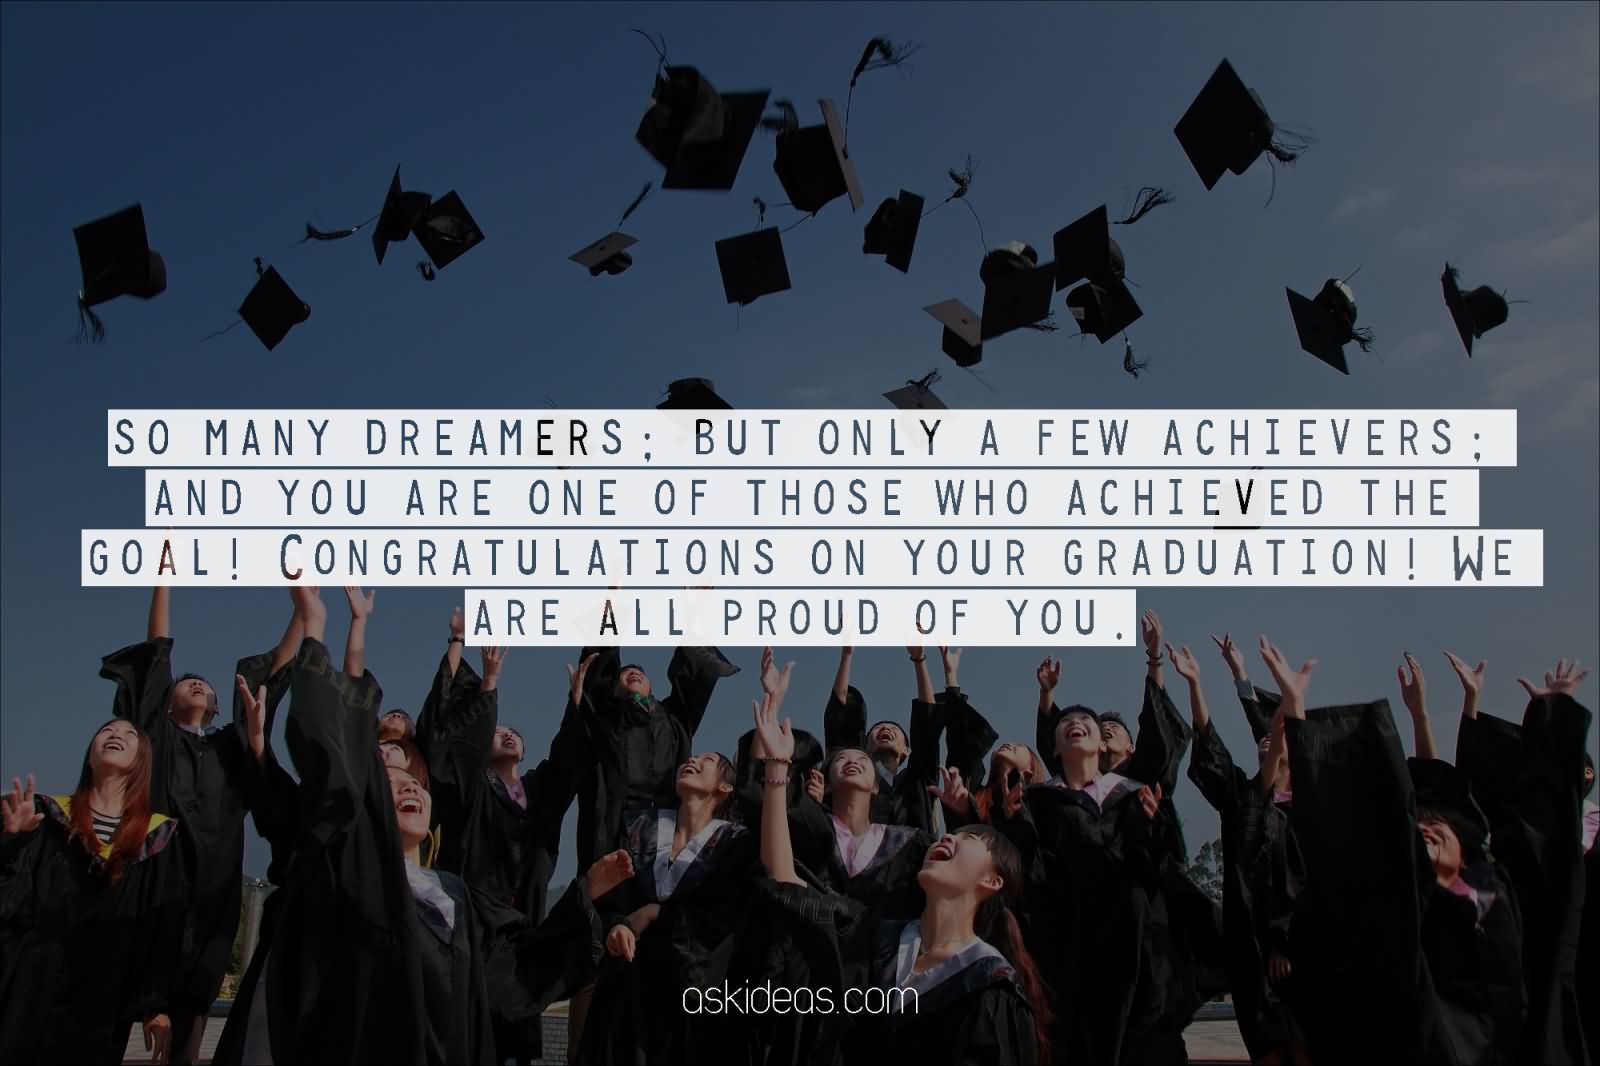 So many dreamers; but only a few achievers; and you are one of those who achieved the goal! Congratulations on your graduation! We are all proud of you.